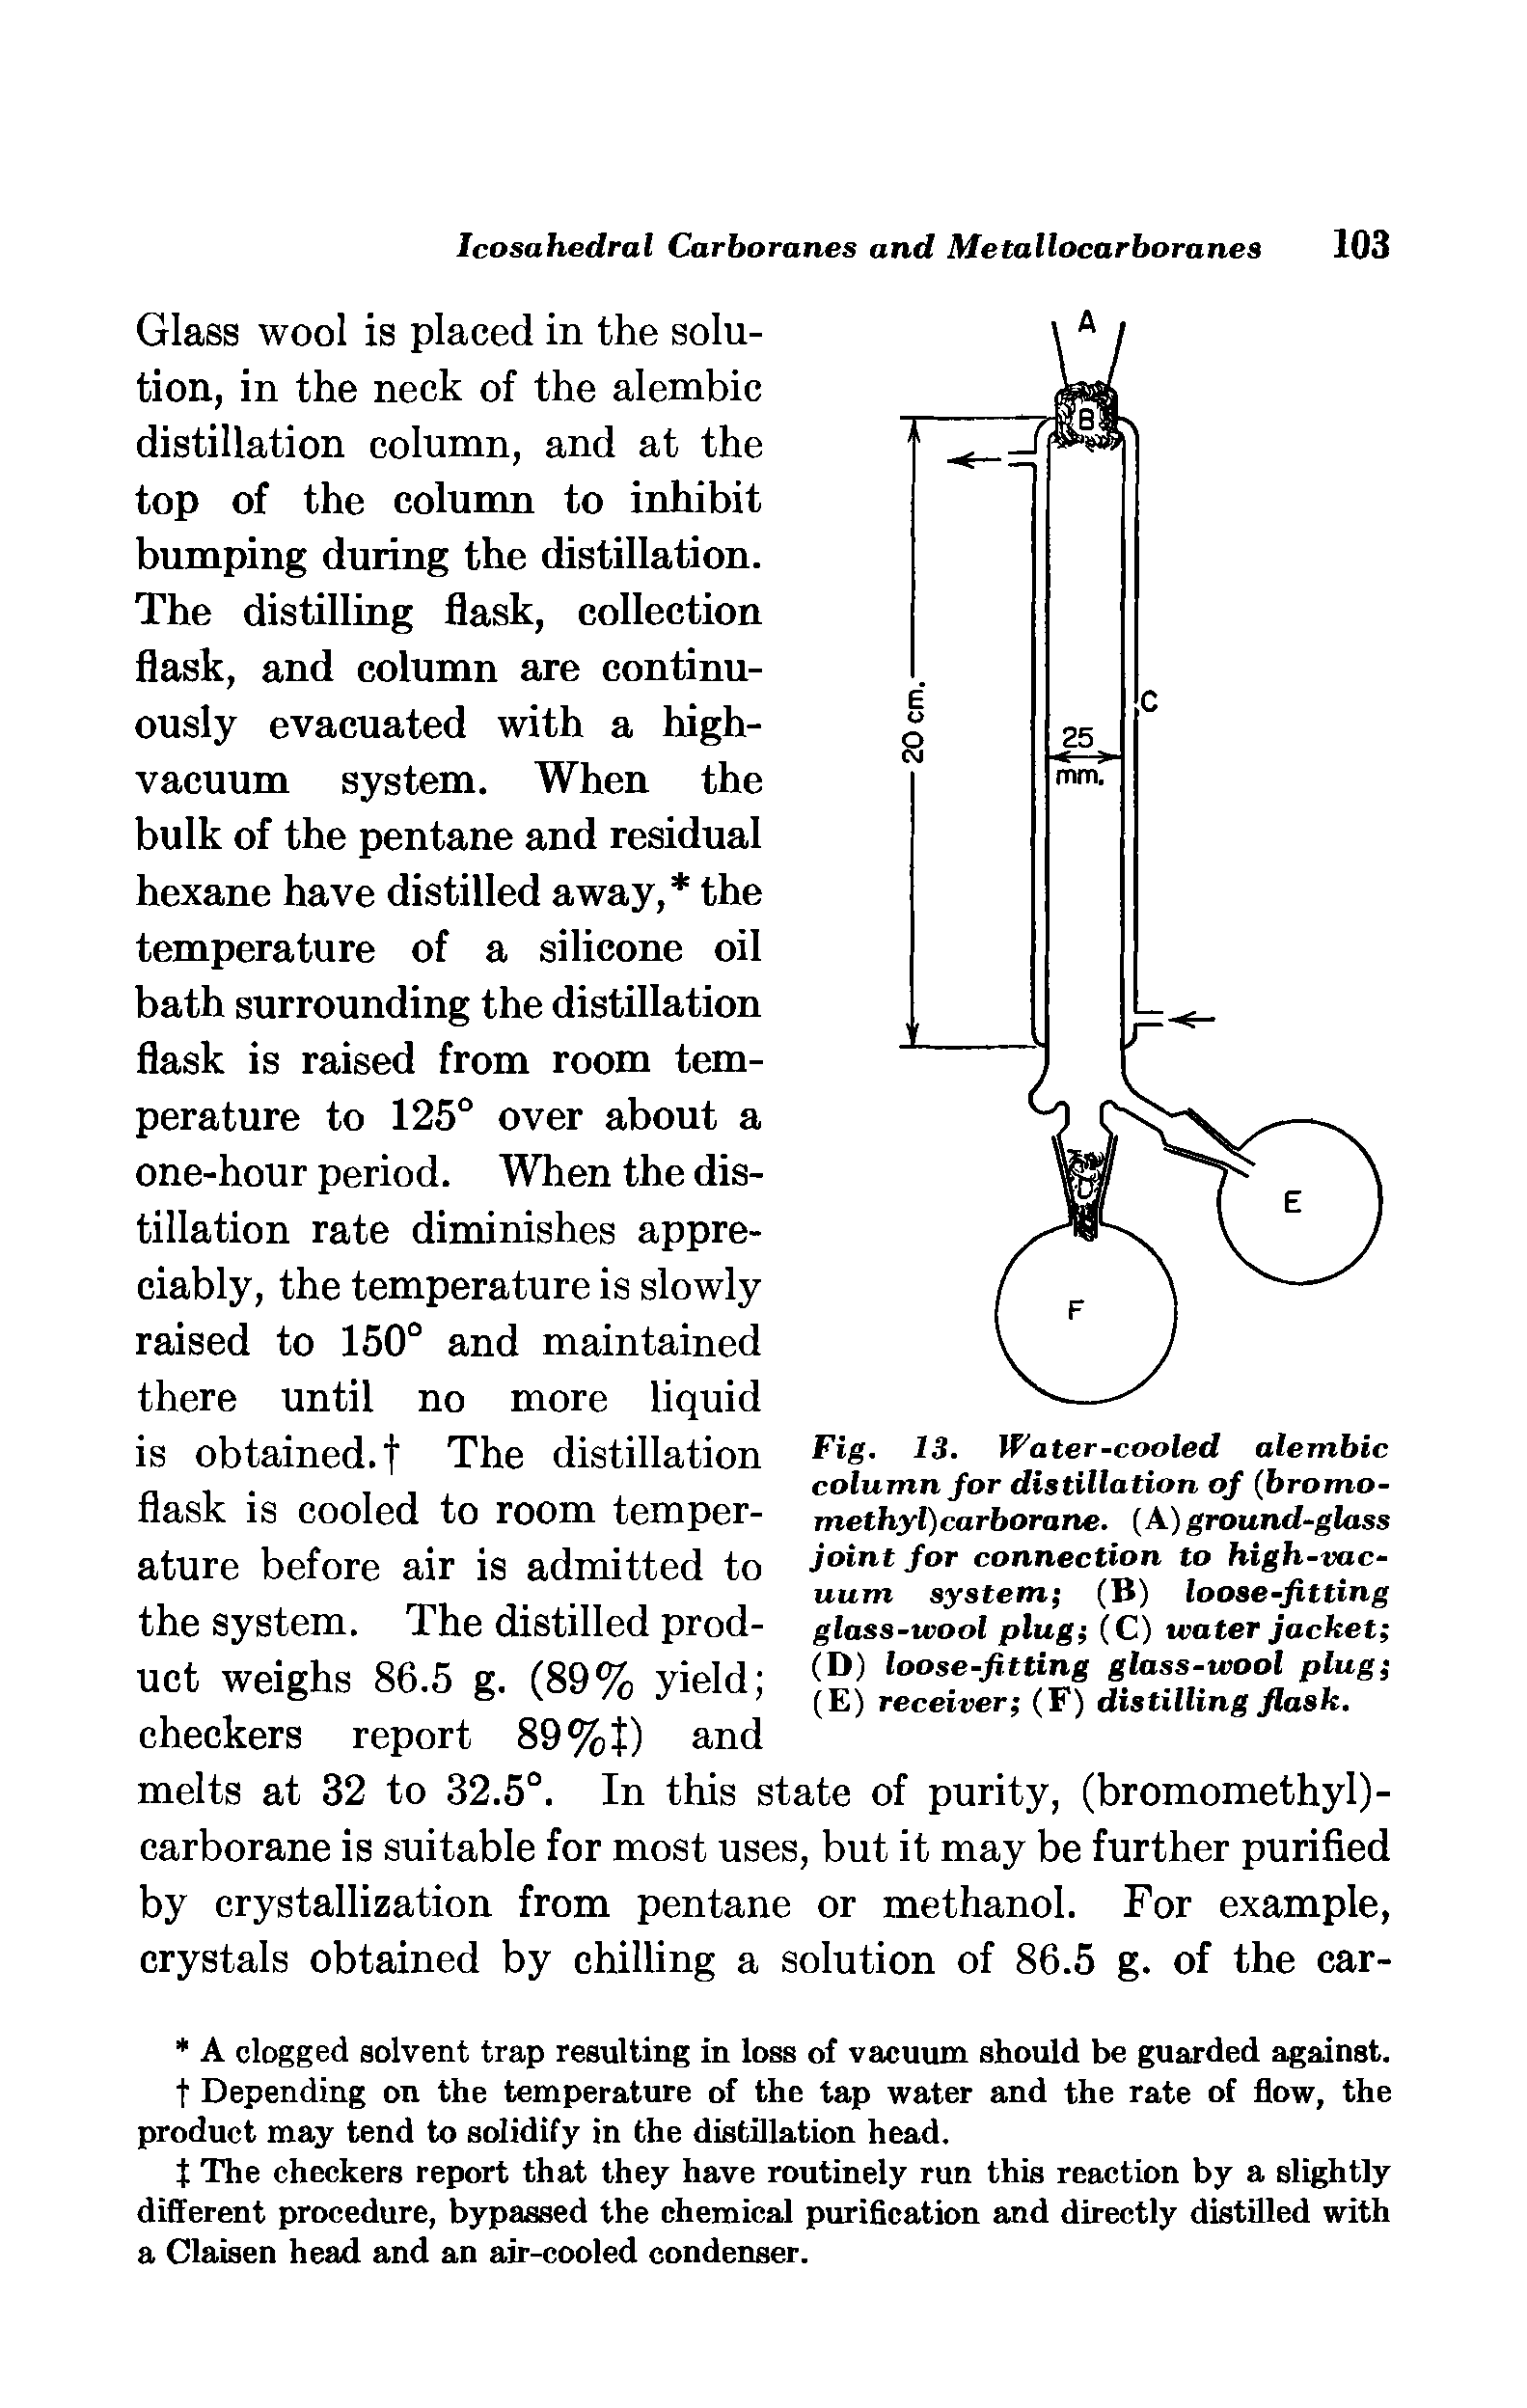 Fig. 13. Water-cooled alembic column for distillation of (bromo-methyl)carborane. A) ground-glass joint for connection to high-vacuum system (B) loose-fitting glass-wool plug (C) water Jacket ...